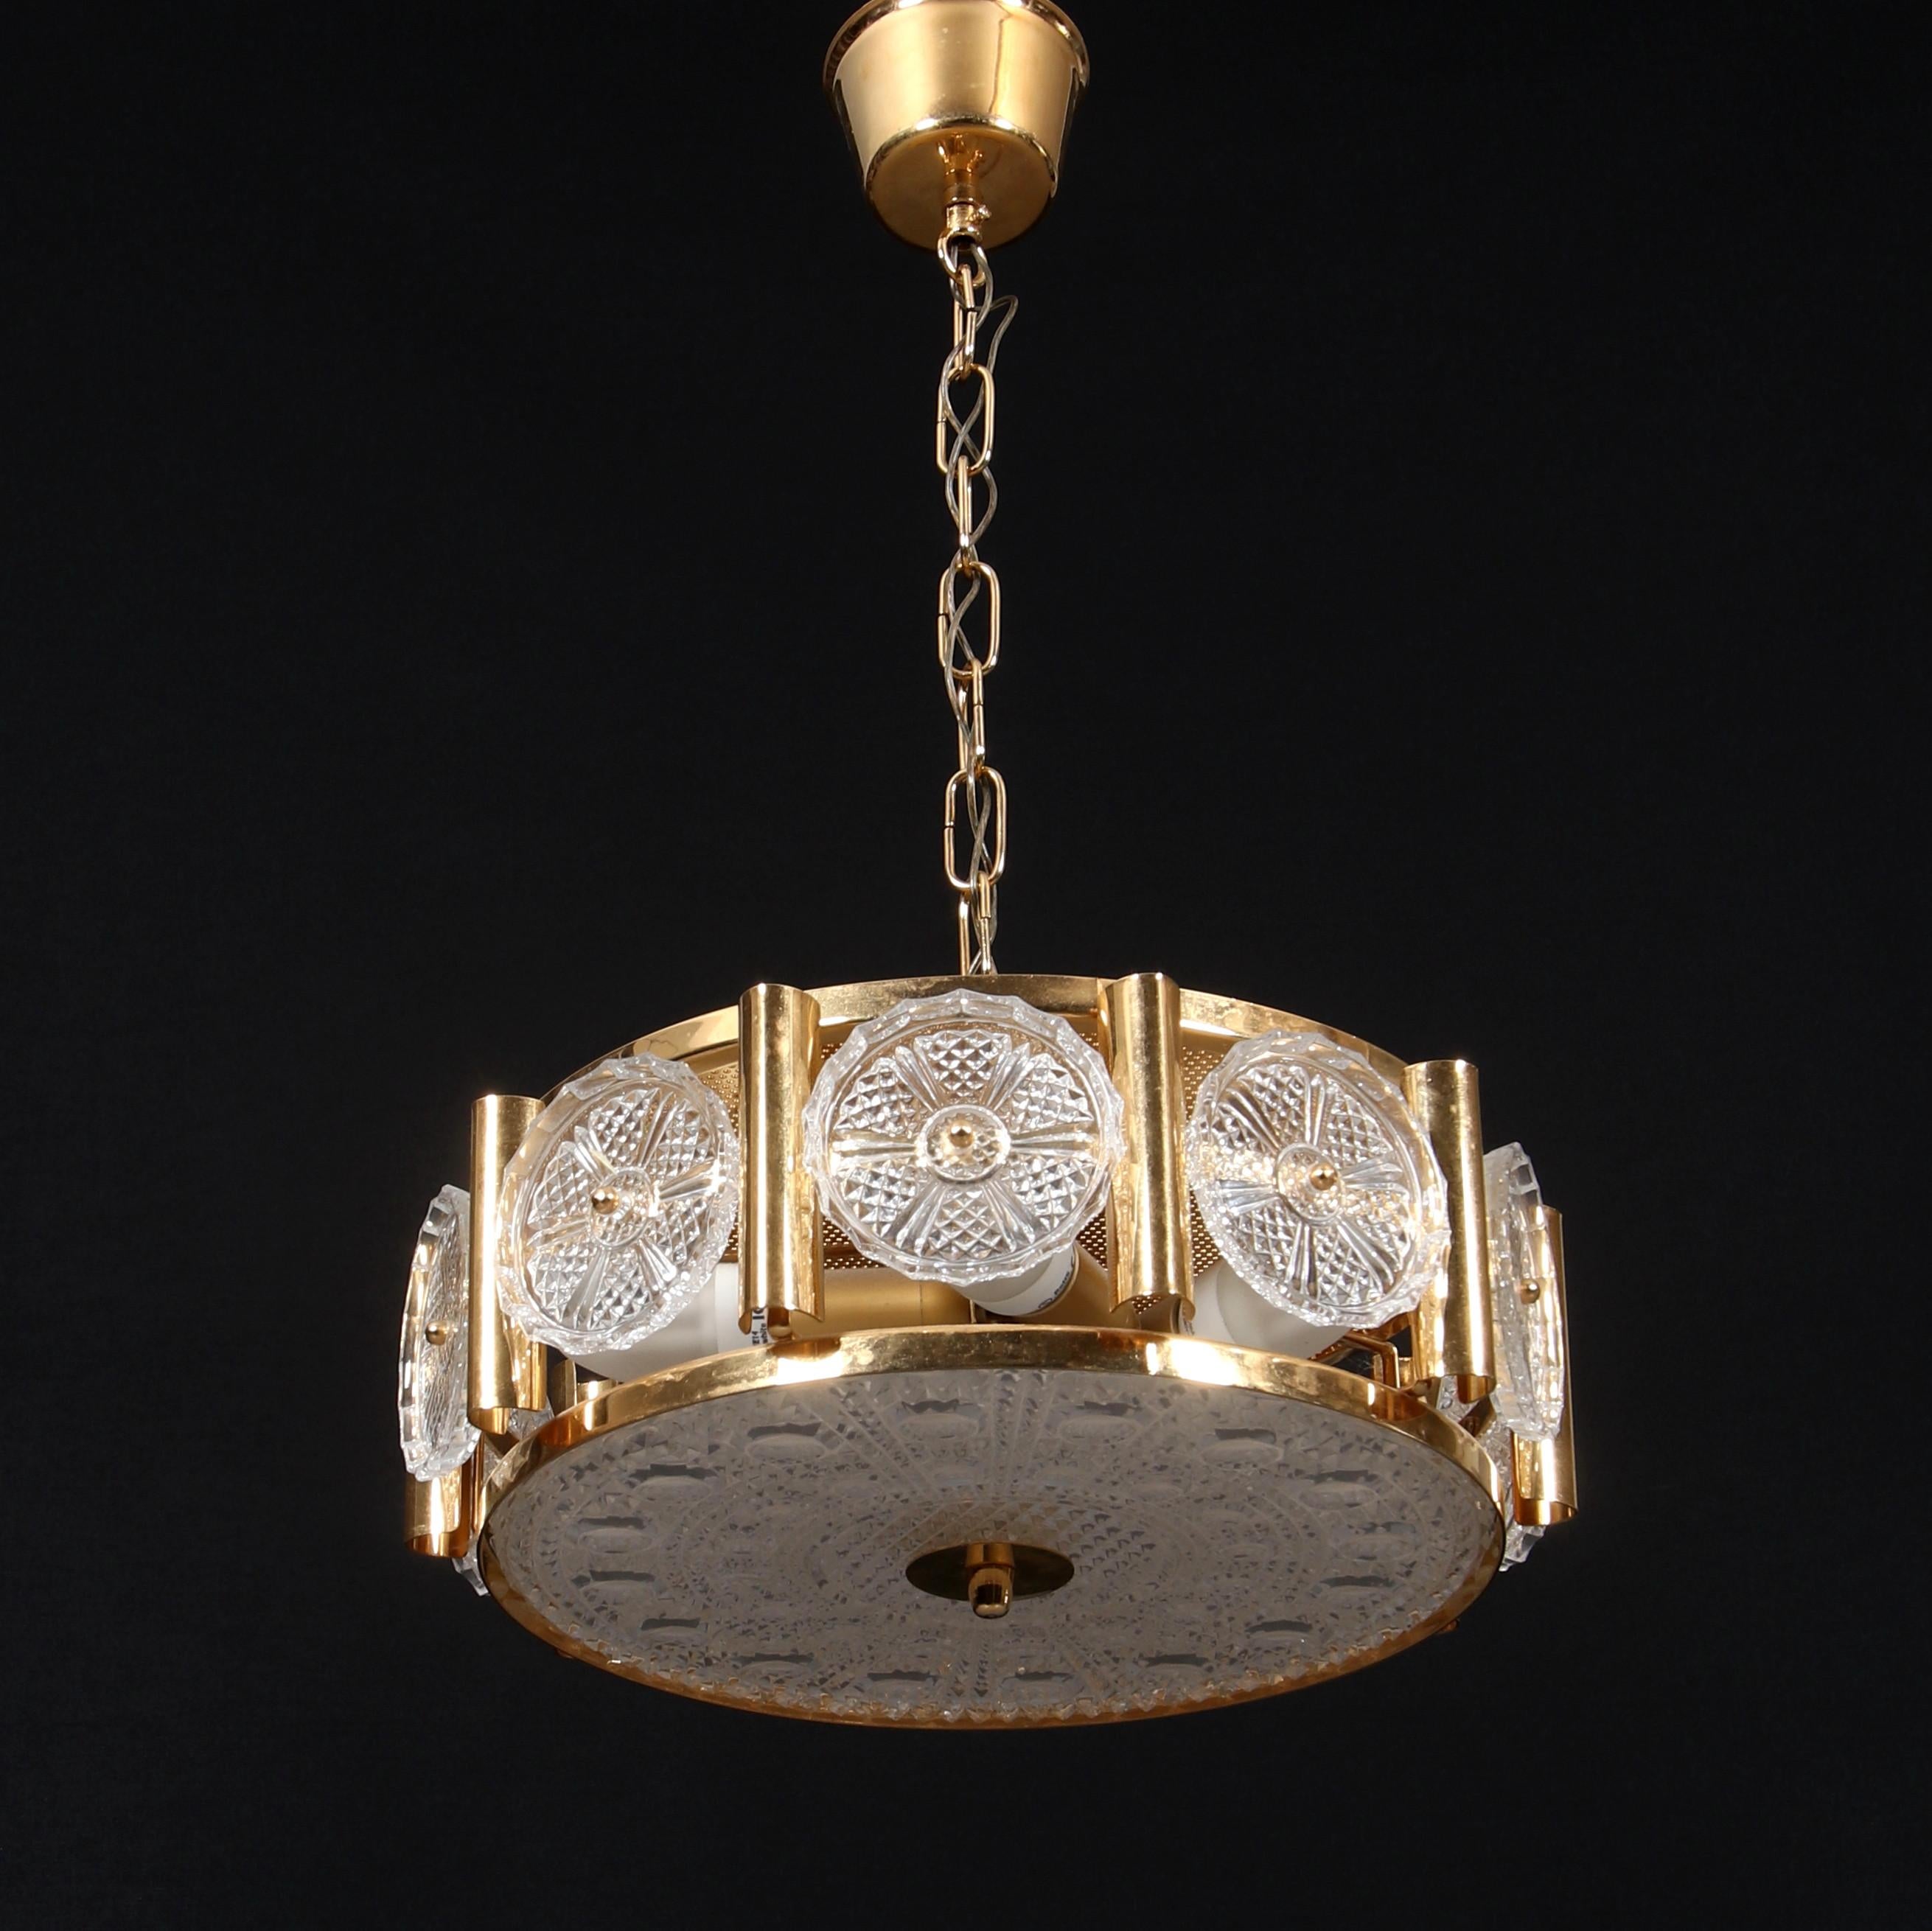 Carl Fagerlund ceiling light for Orrefors, Sweden, 1950
A rare model of texturized molded glass mounted on a brass structure.
The height can be adjusted
Good condition.